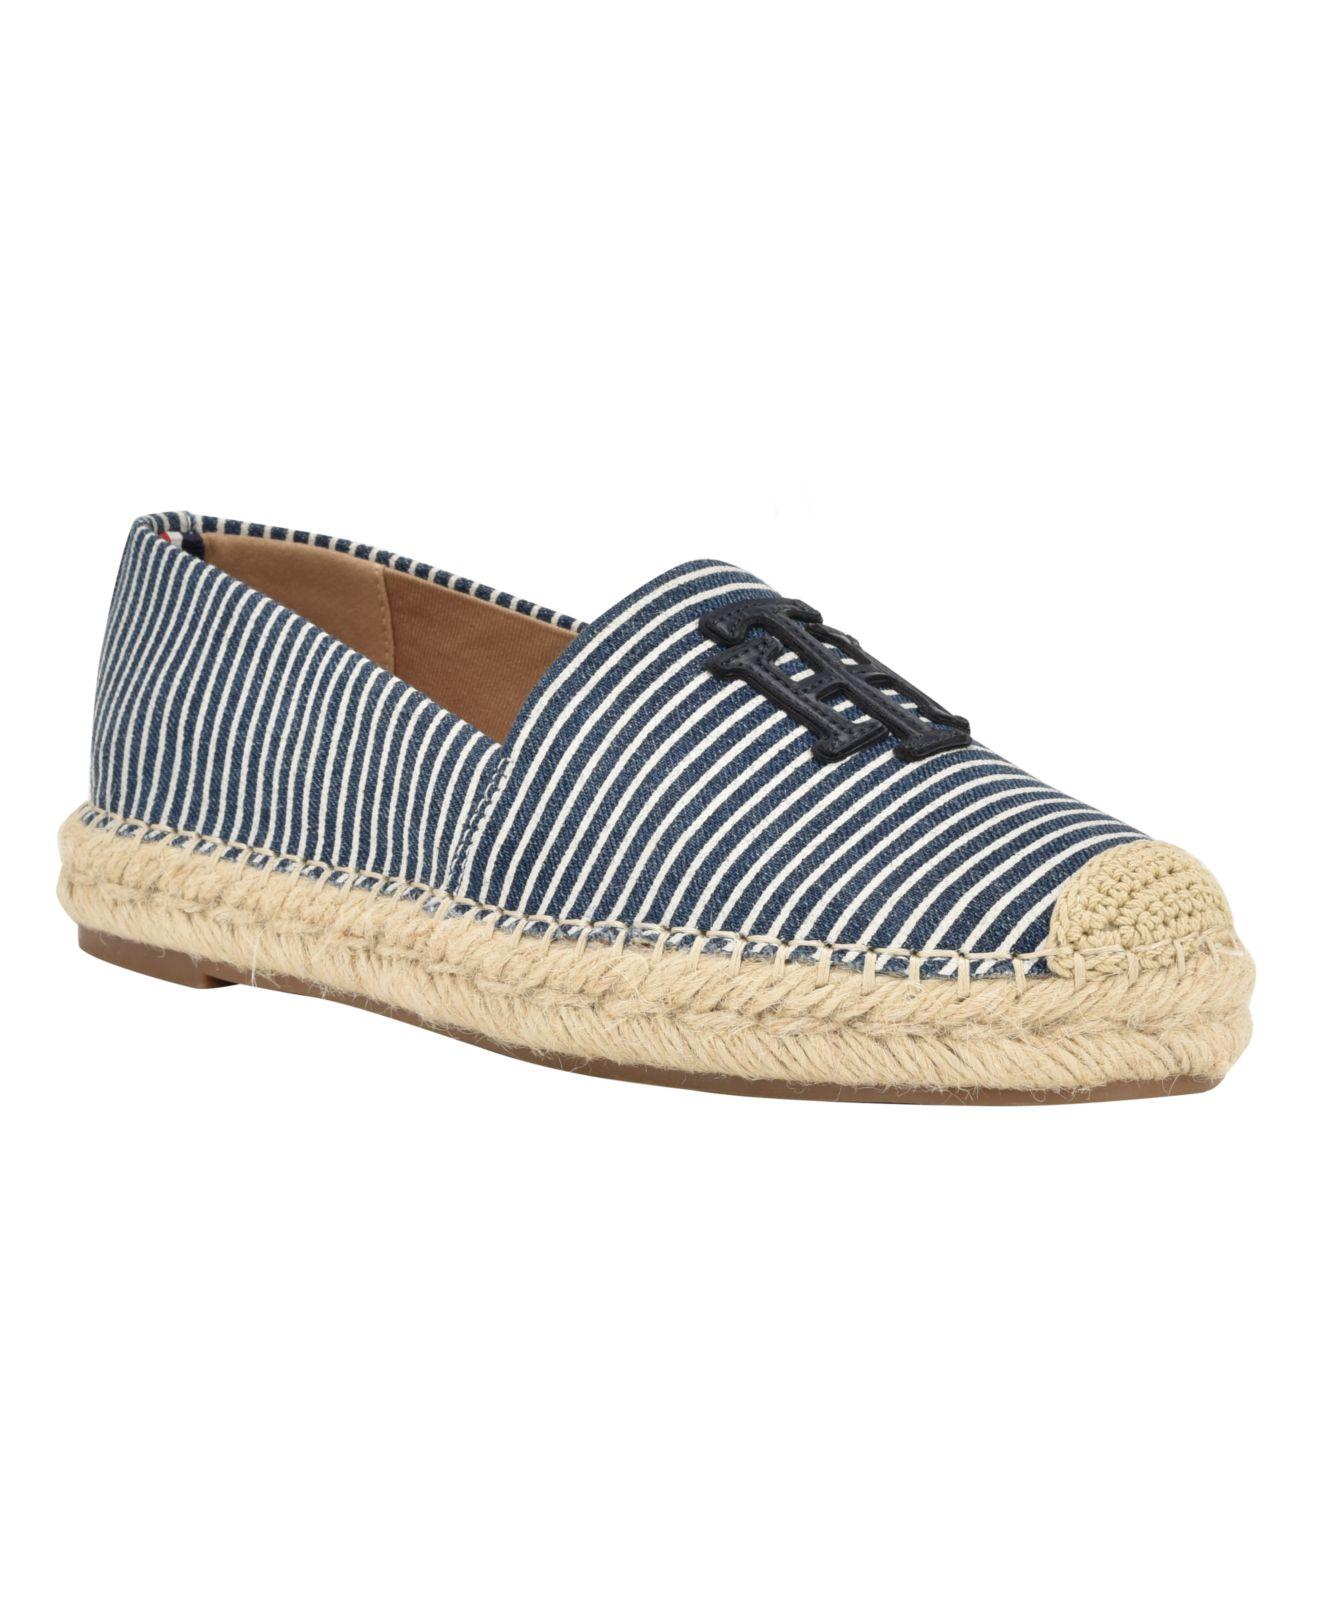 Tommy Hilfiger Peanni Flat Espadrille Closed Toe Shoes in Blue | Lyst